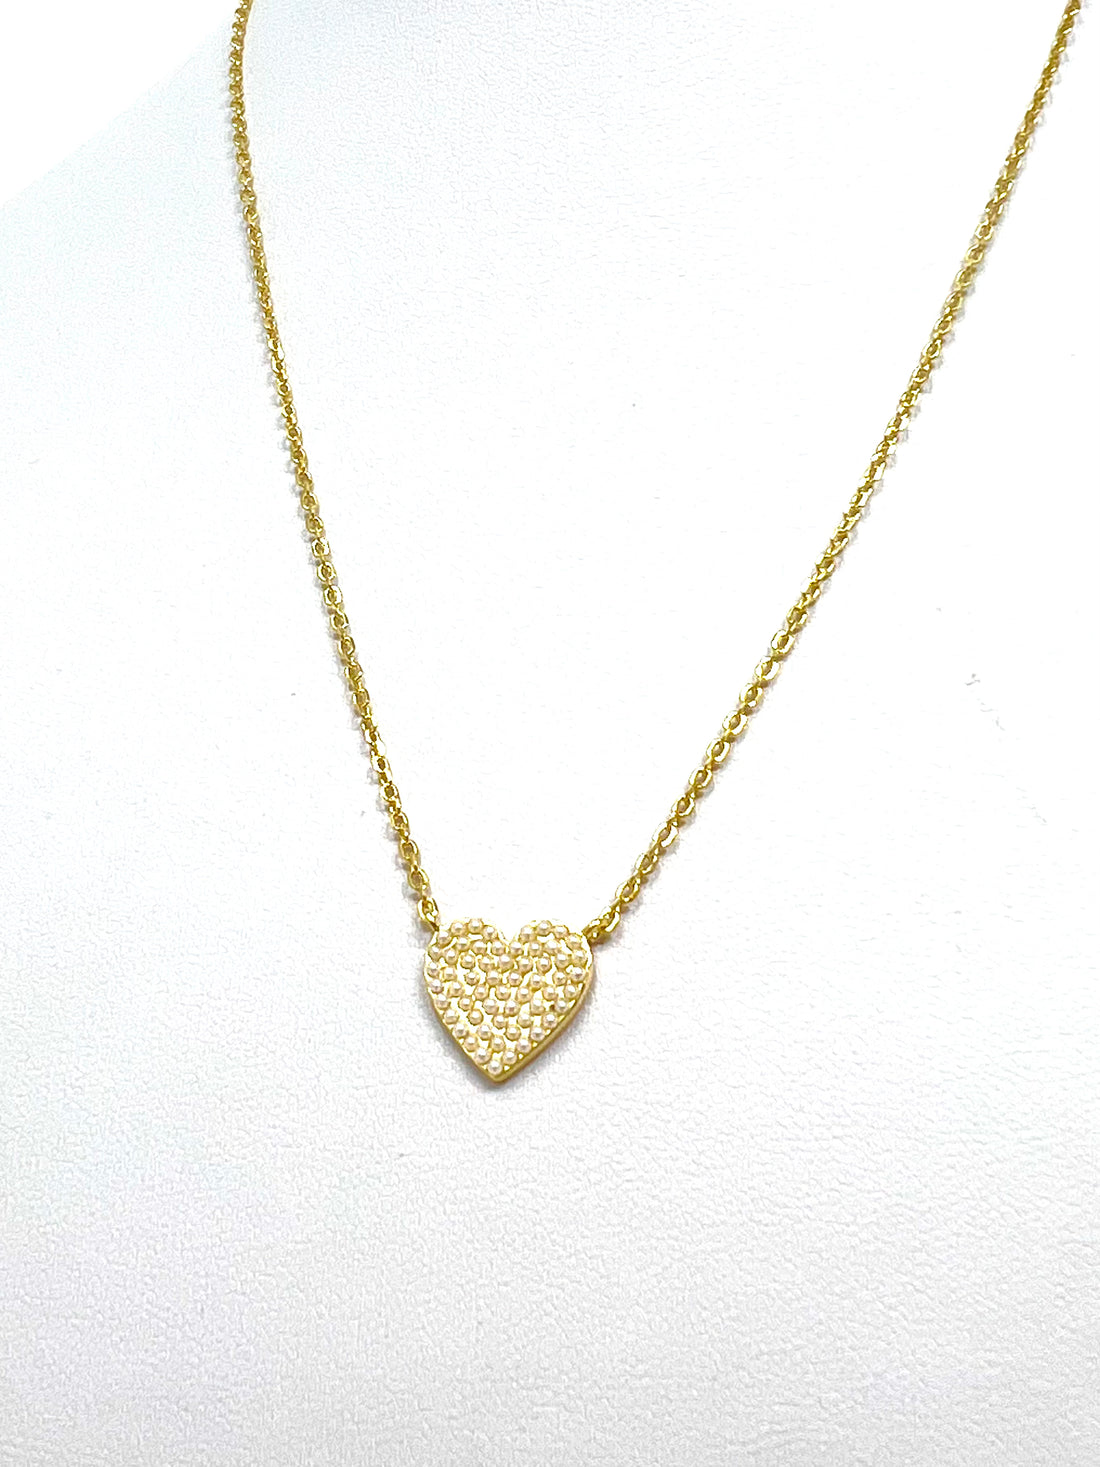 Sweet Heart Necklace in Gold with Pearl